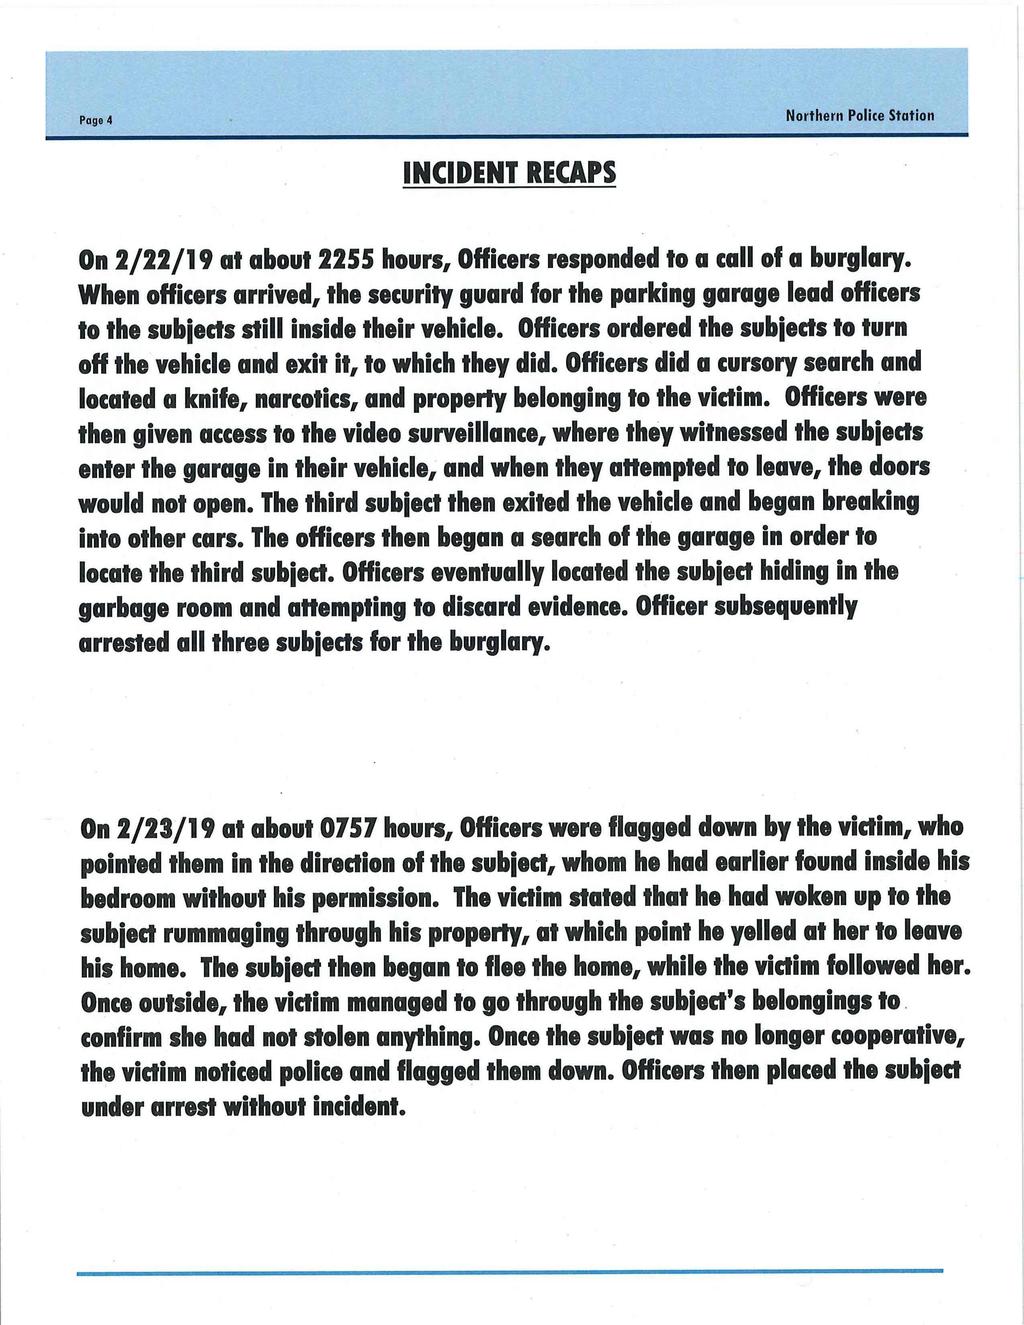 Page 4 INCIDENT RECAPS On 2/22/19 at about 2255 hours, Officers responded to a call of a burglary.